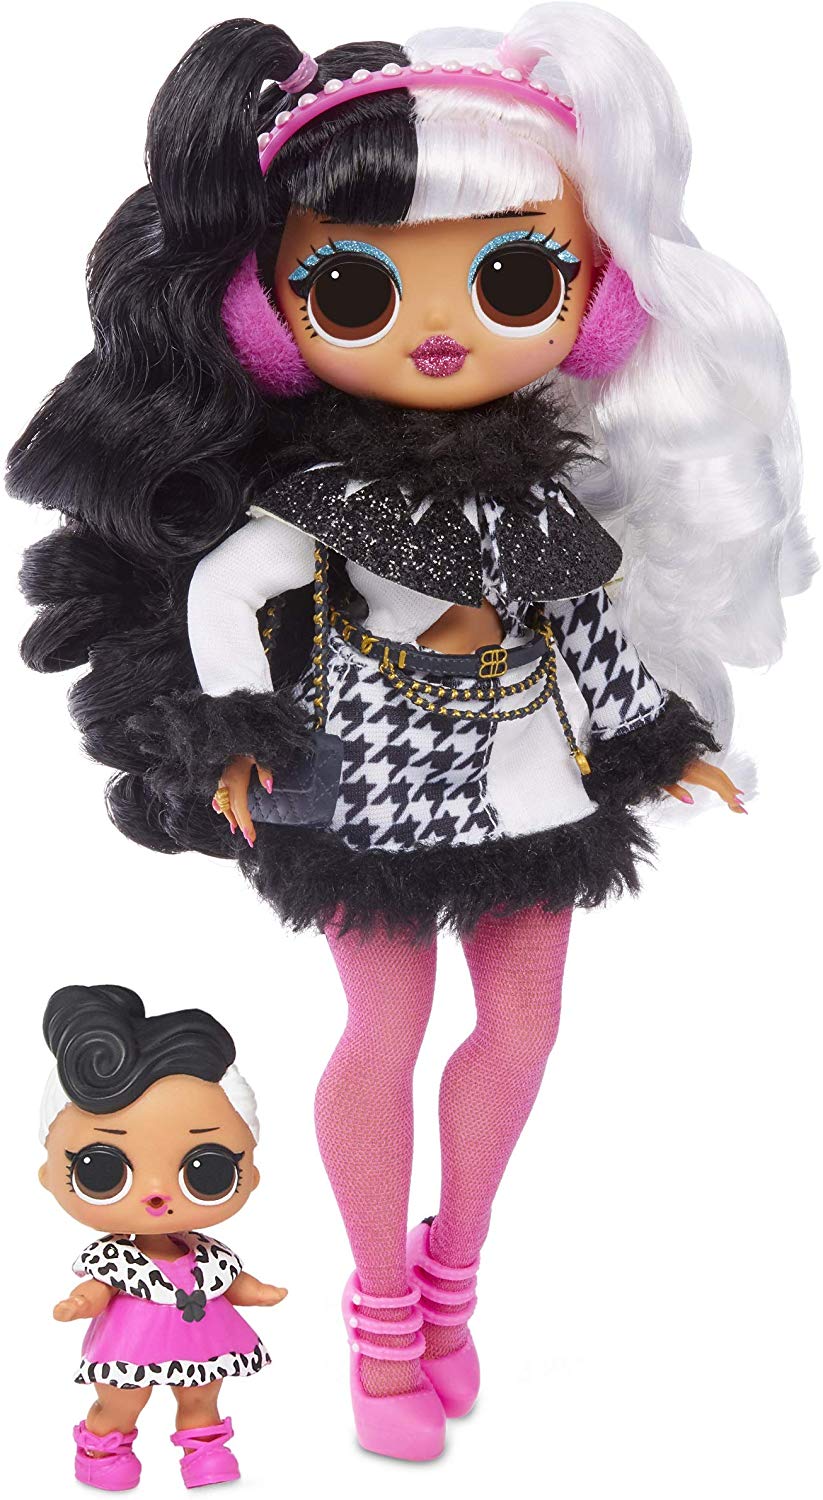 Where to Buy LOL Winter Disco OMG Dollie